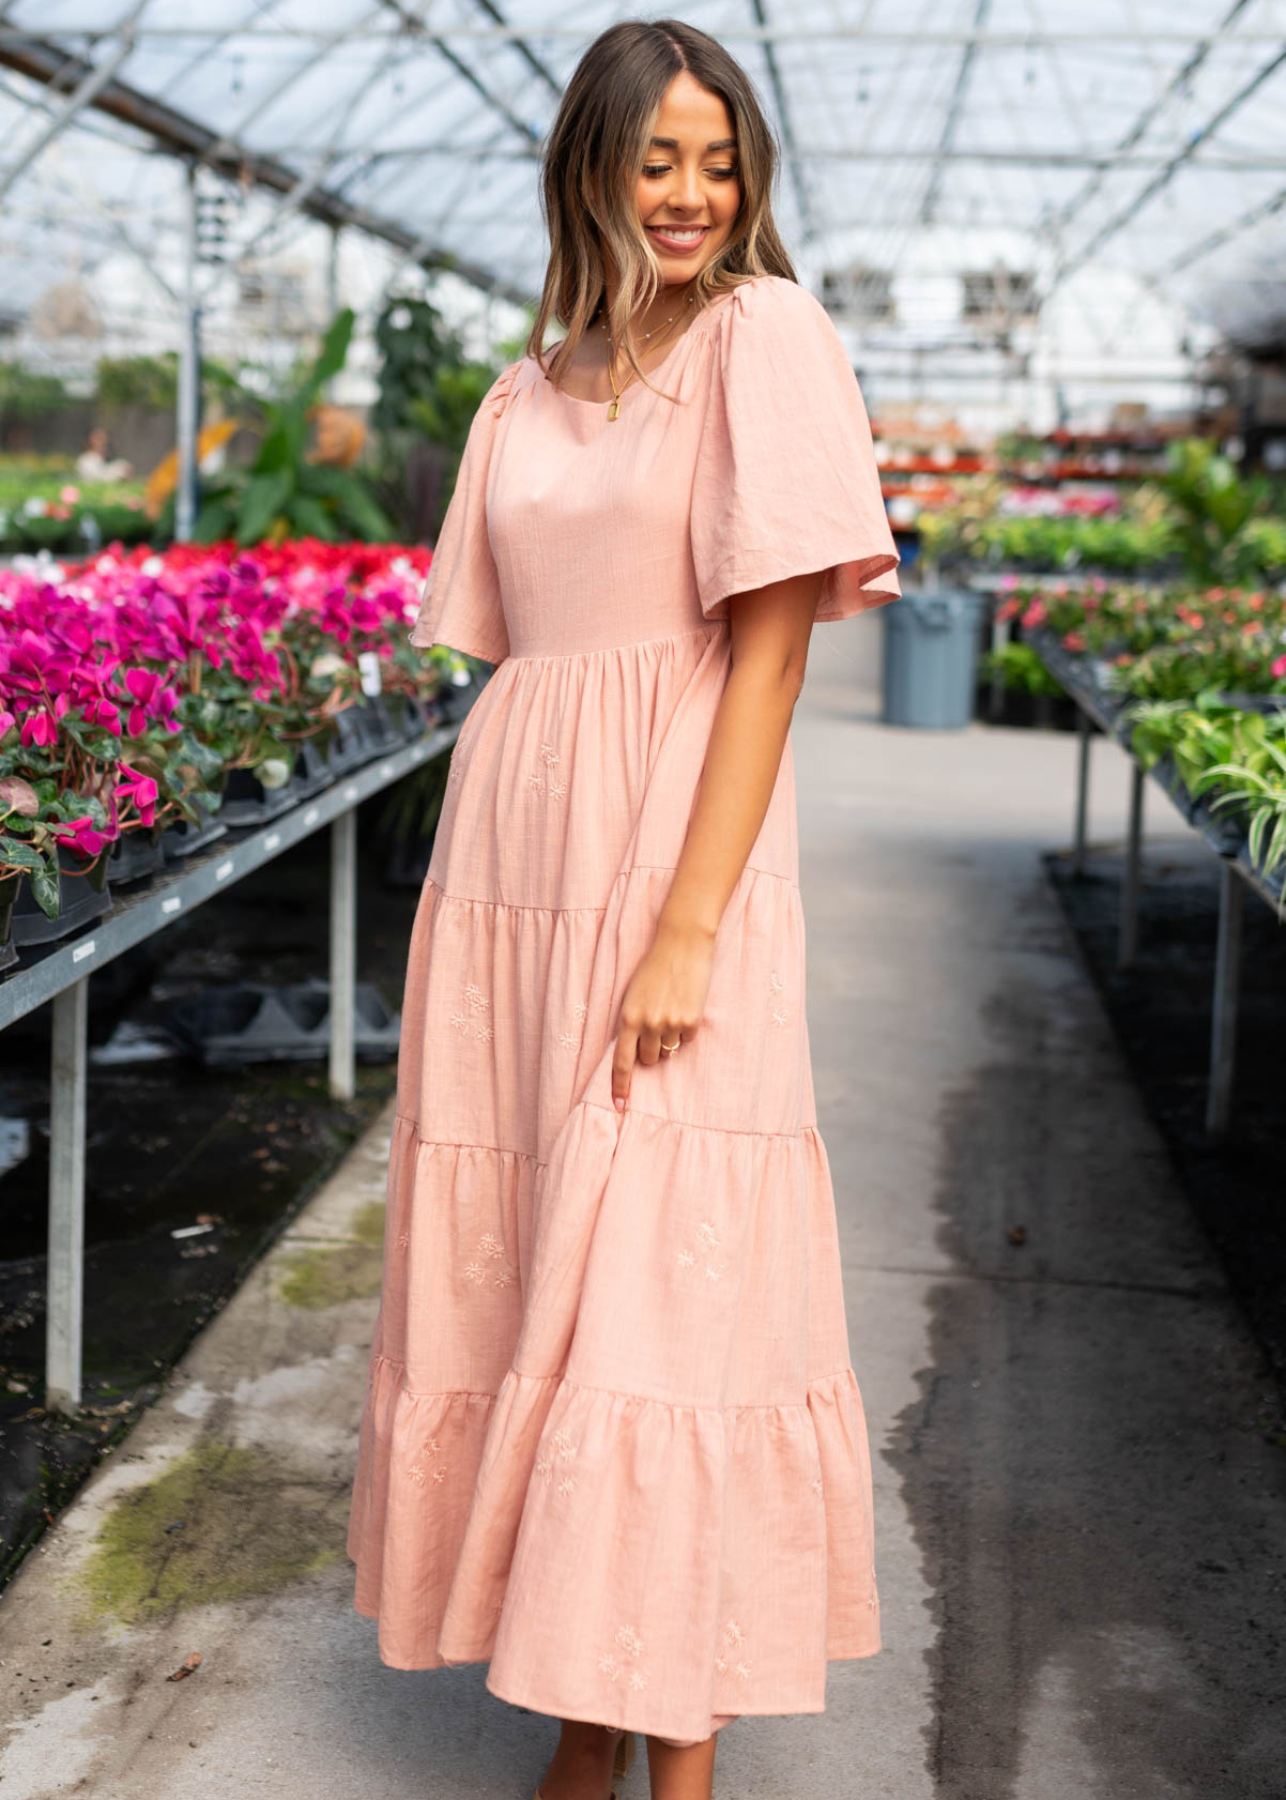 Blush floral embroidered dress